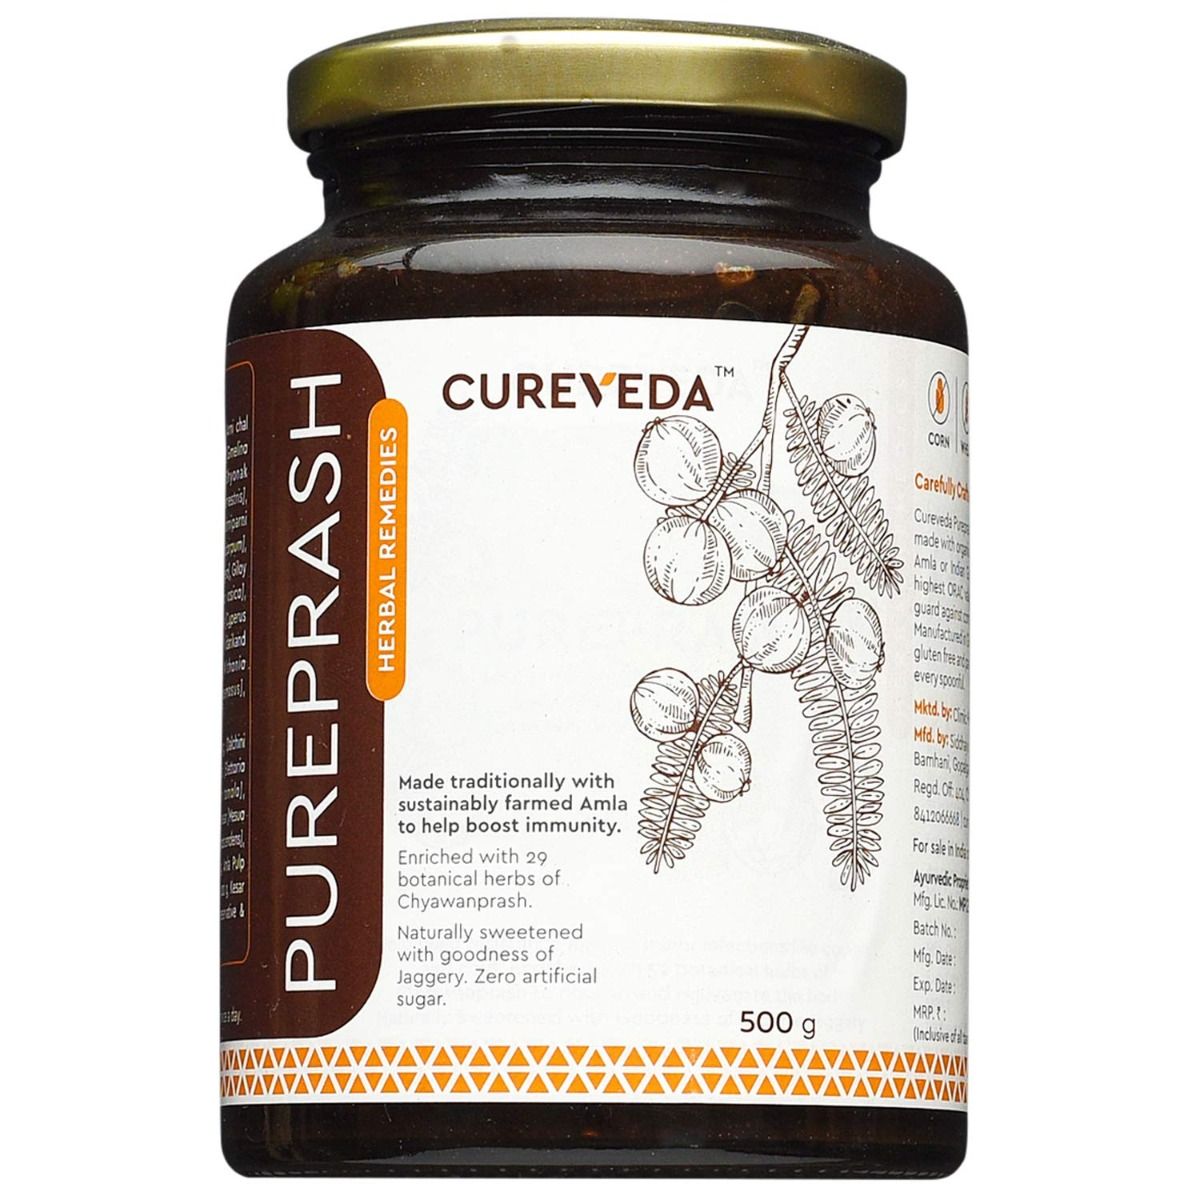 Cureveda Pureprash, 500 gm Price, Uses, Side Effects, Composition ...